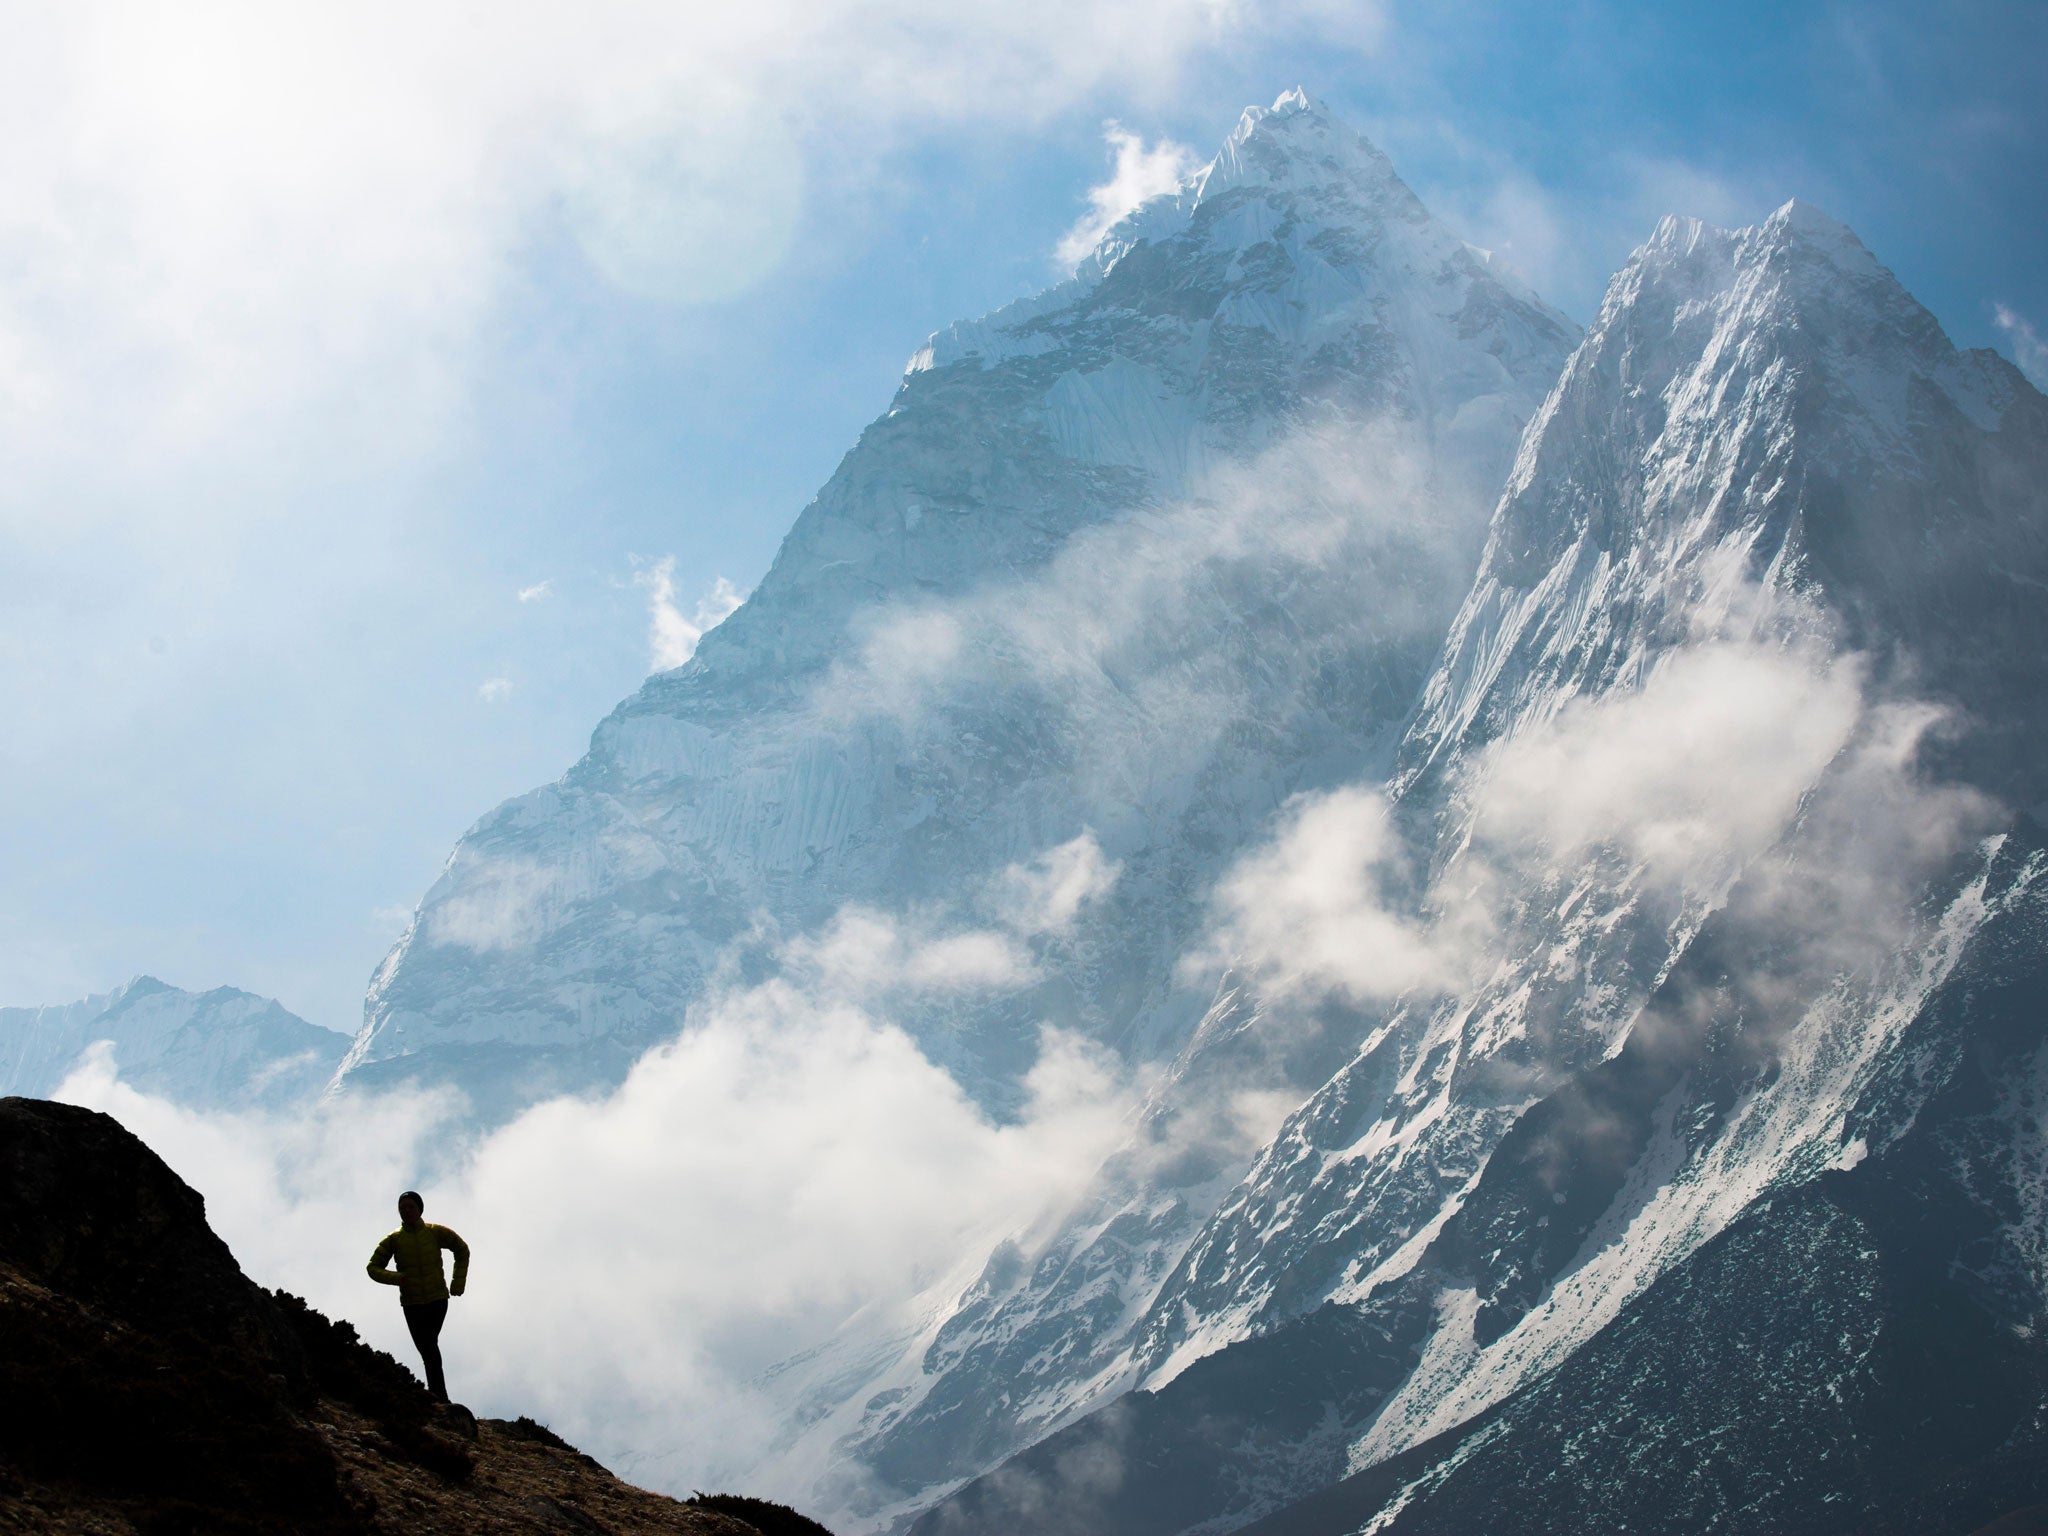 Higher and longer: the Himalayas is Lizzy Hawker's natural habitat